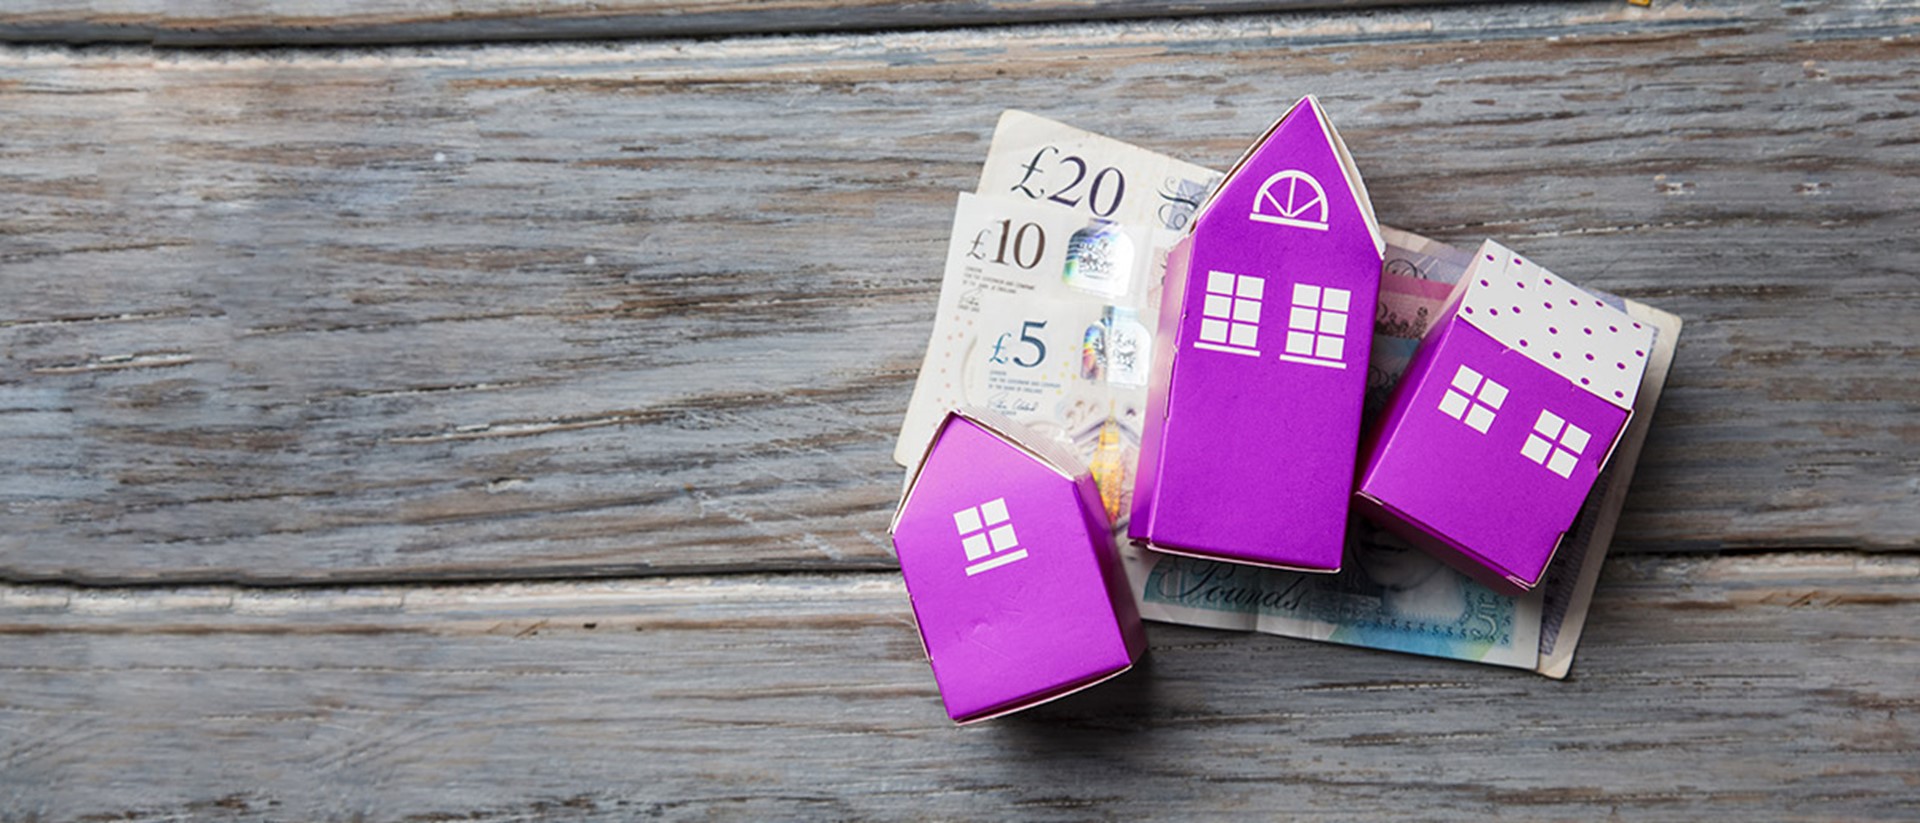 Image of purple cardboard houses on bank notes on top of wooden slabs